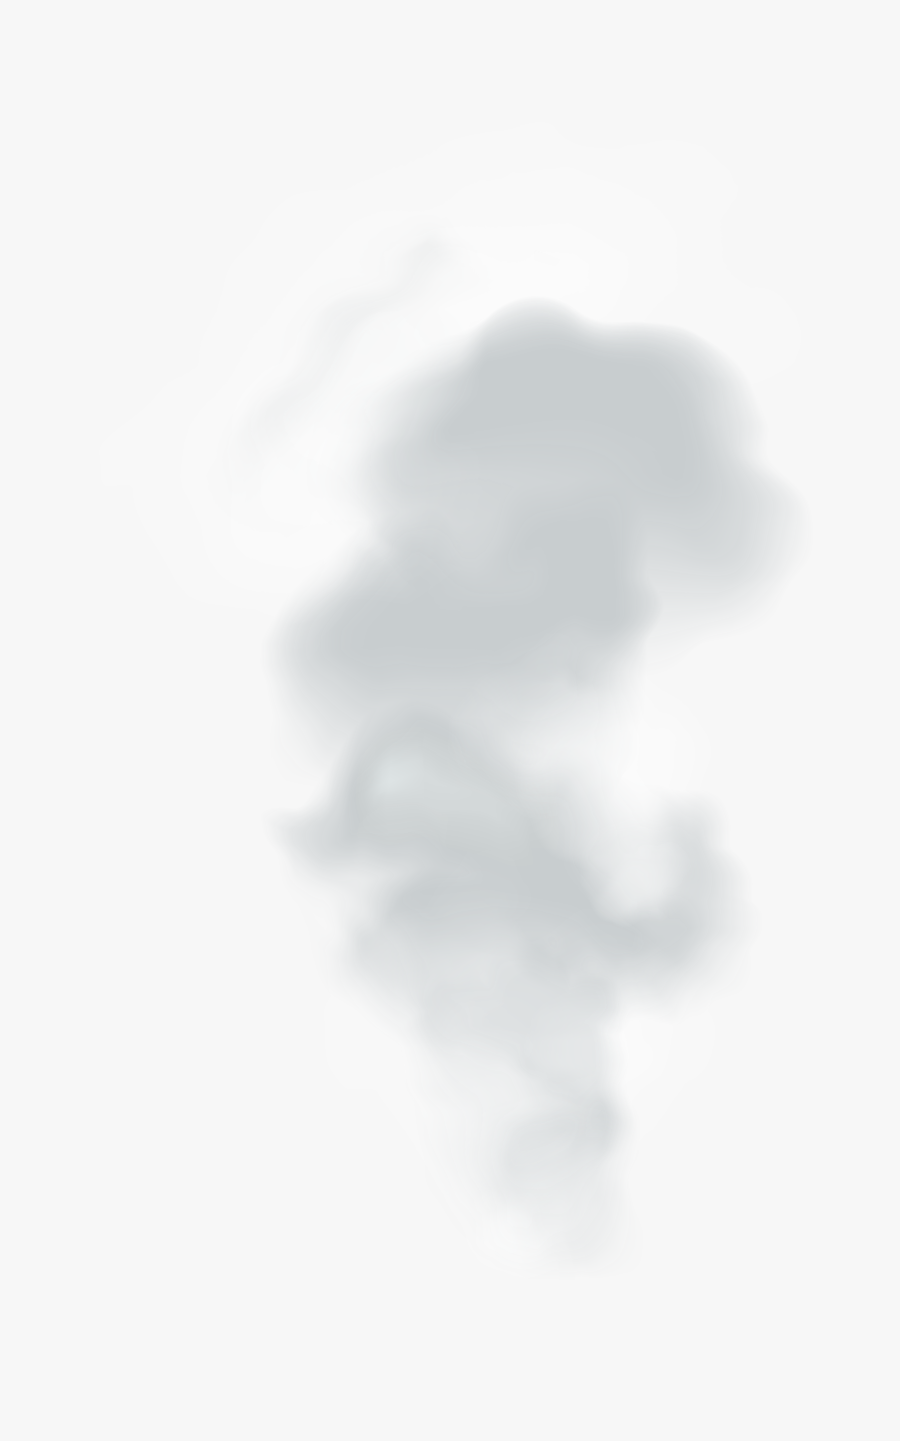 Smoke - Smoke Png And Background, Transparent Clipart